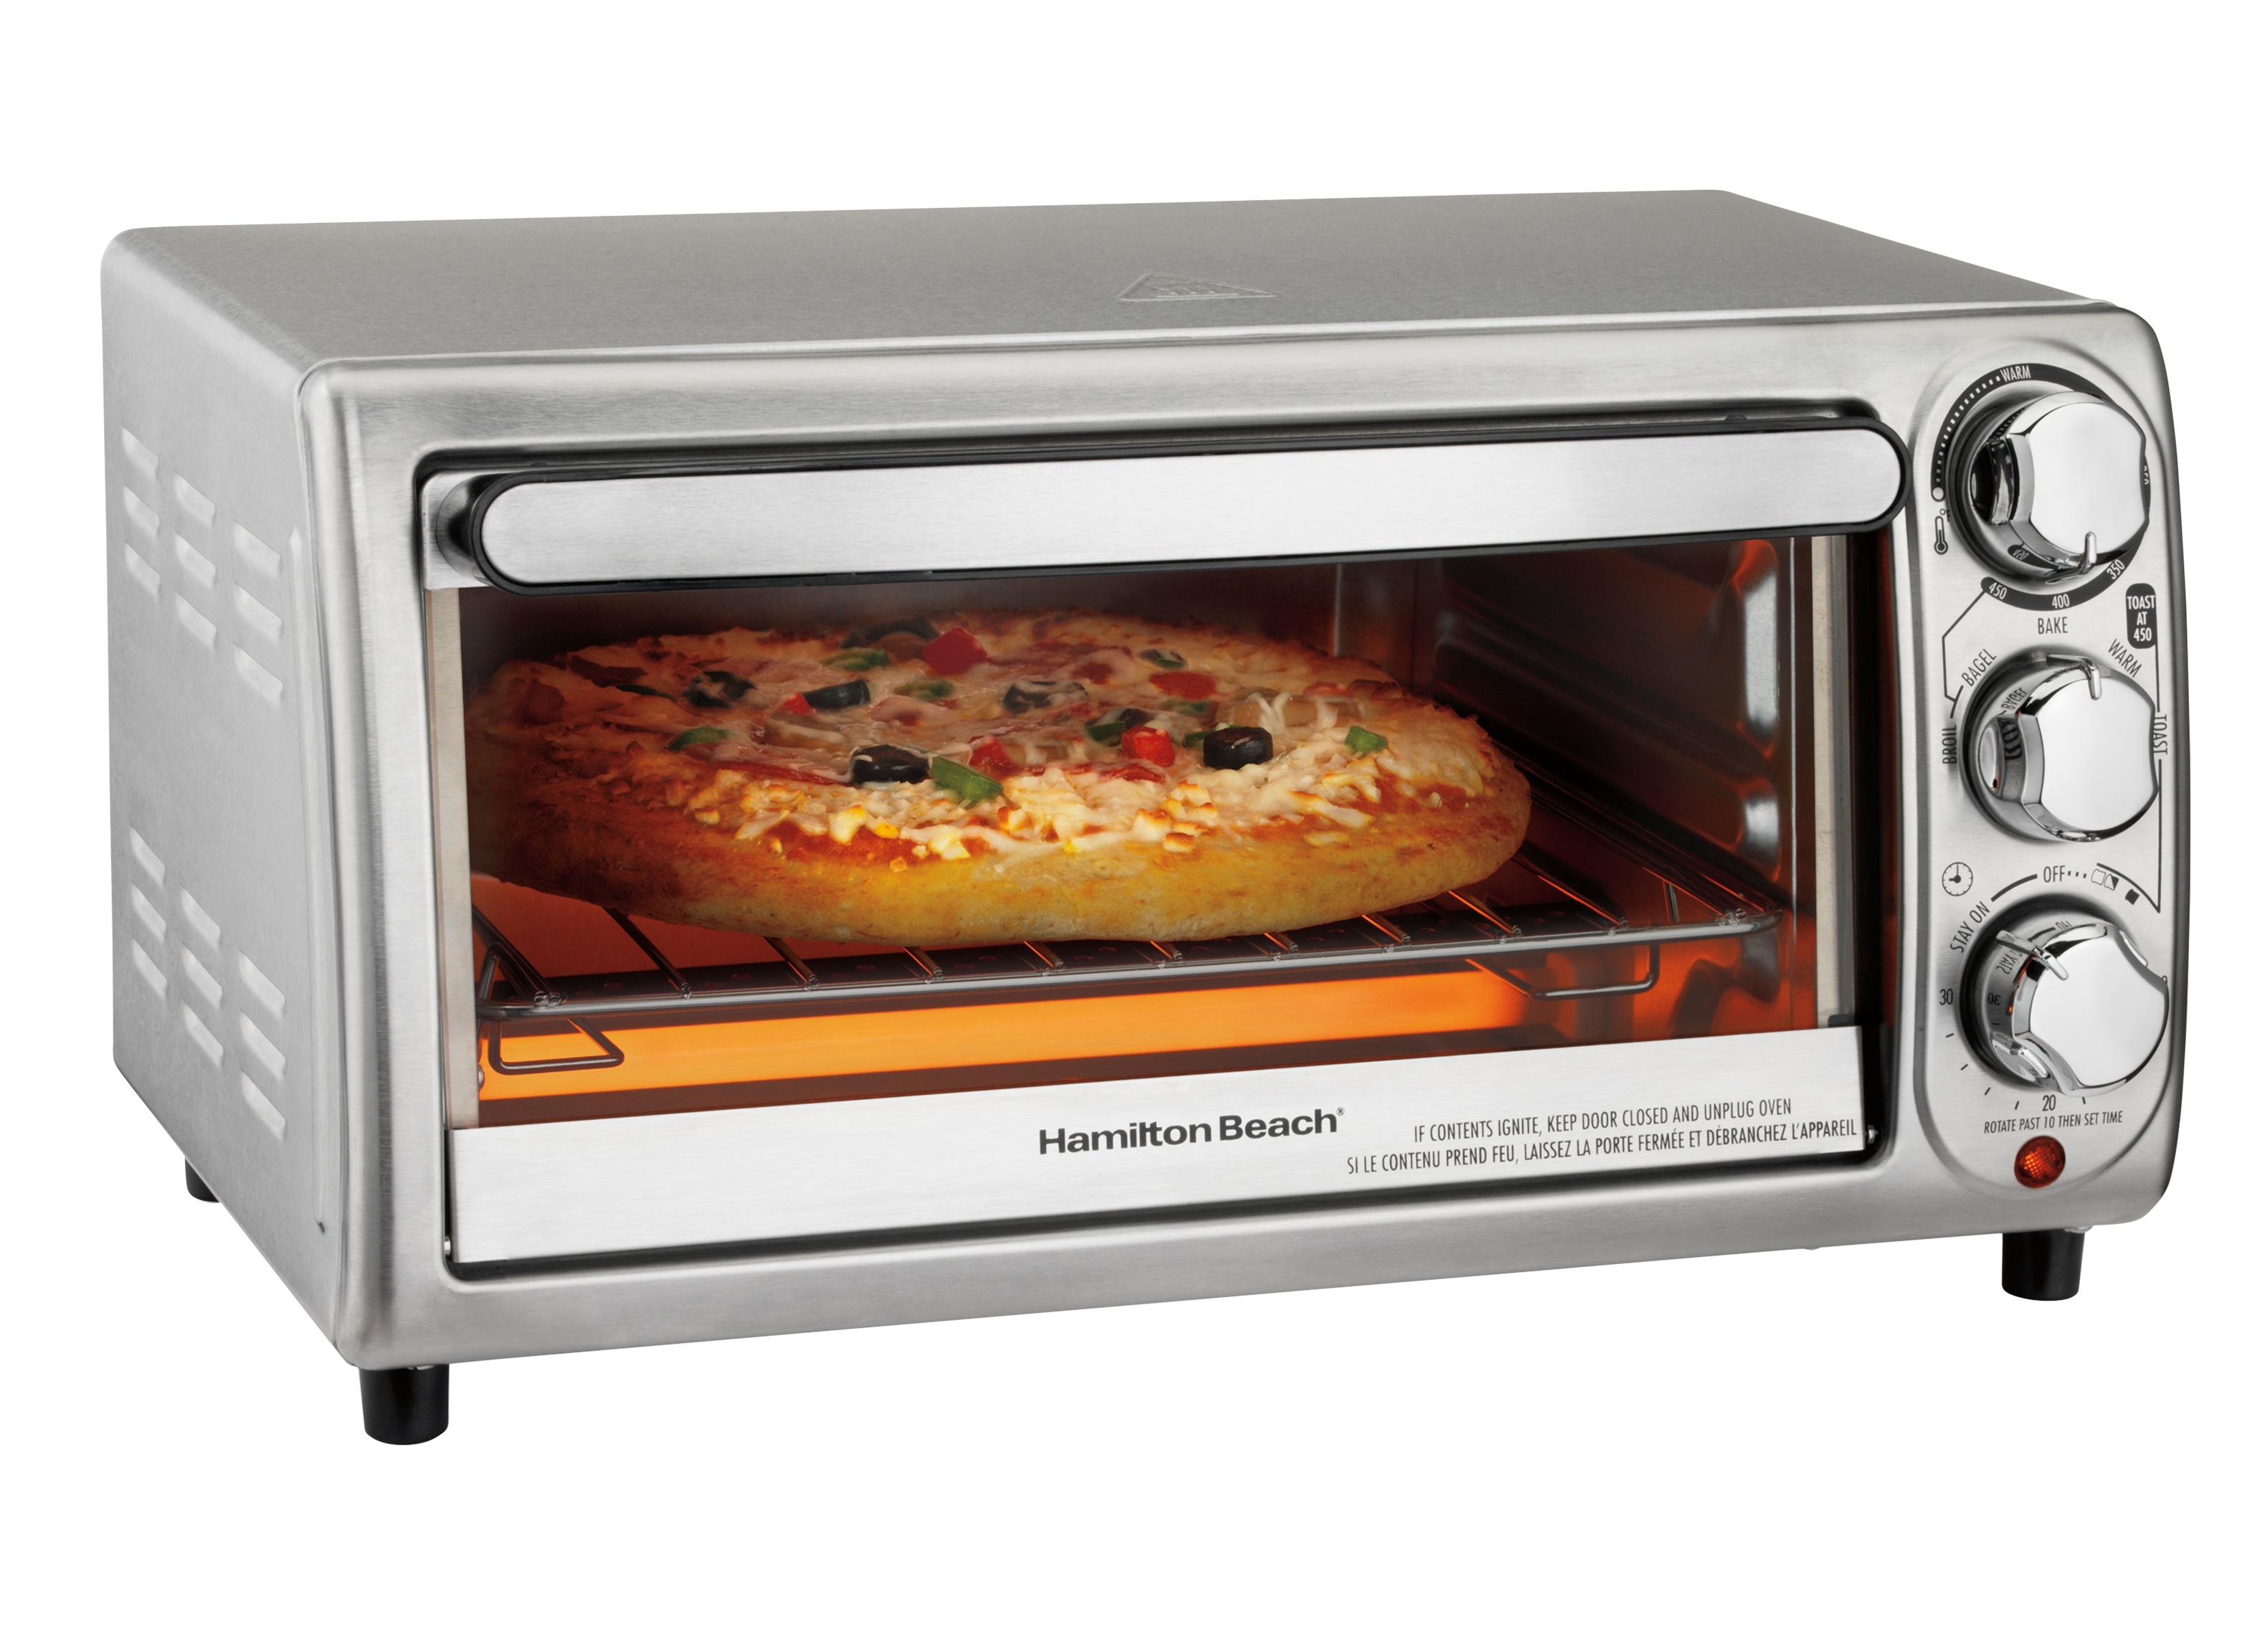 BLACK+DECKER 4-Slice Convection Oven, Stainless Steel, Curved Interior fits  a 9 inch Pizza, TO1313SBD